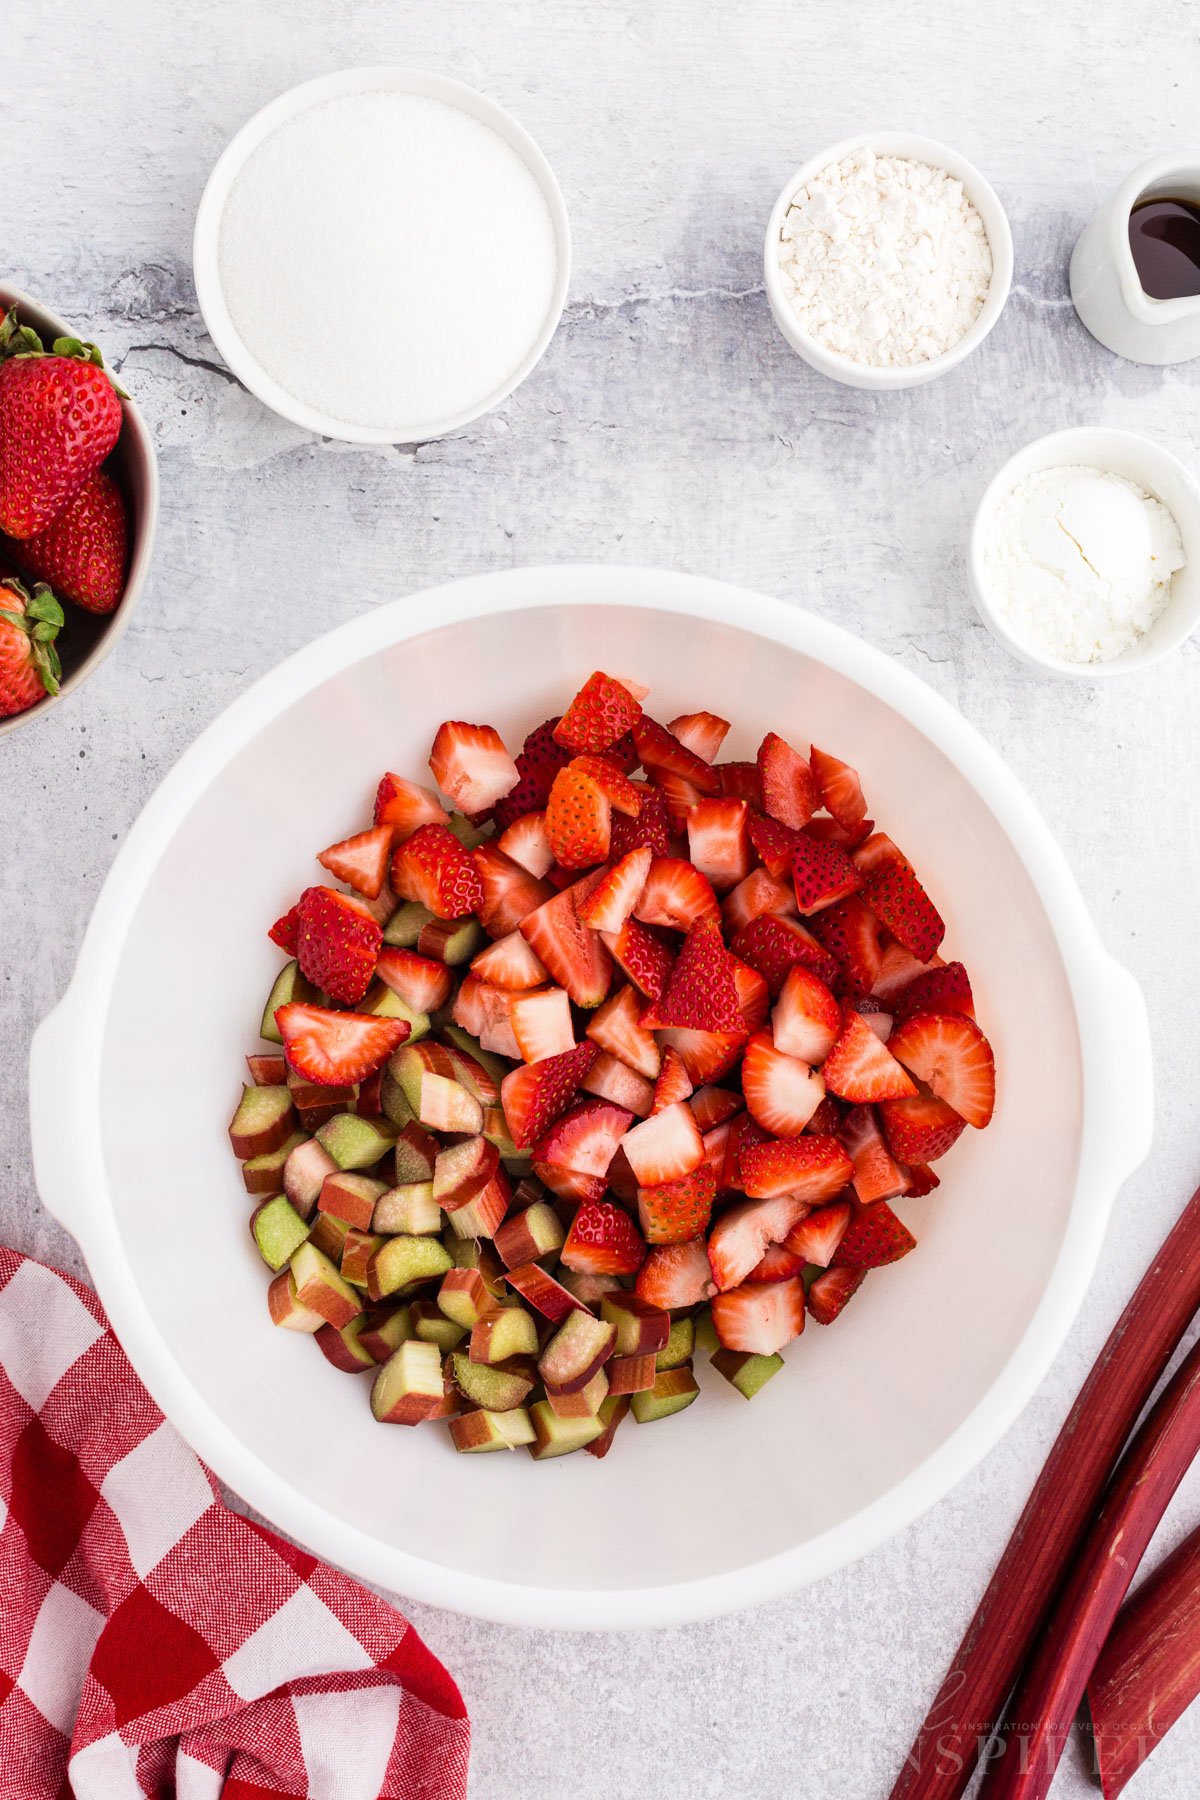 Sliced strawberries and rhubarb in a mixing bowl.